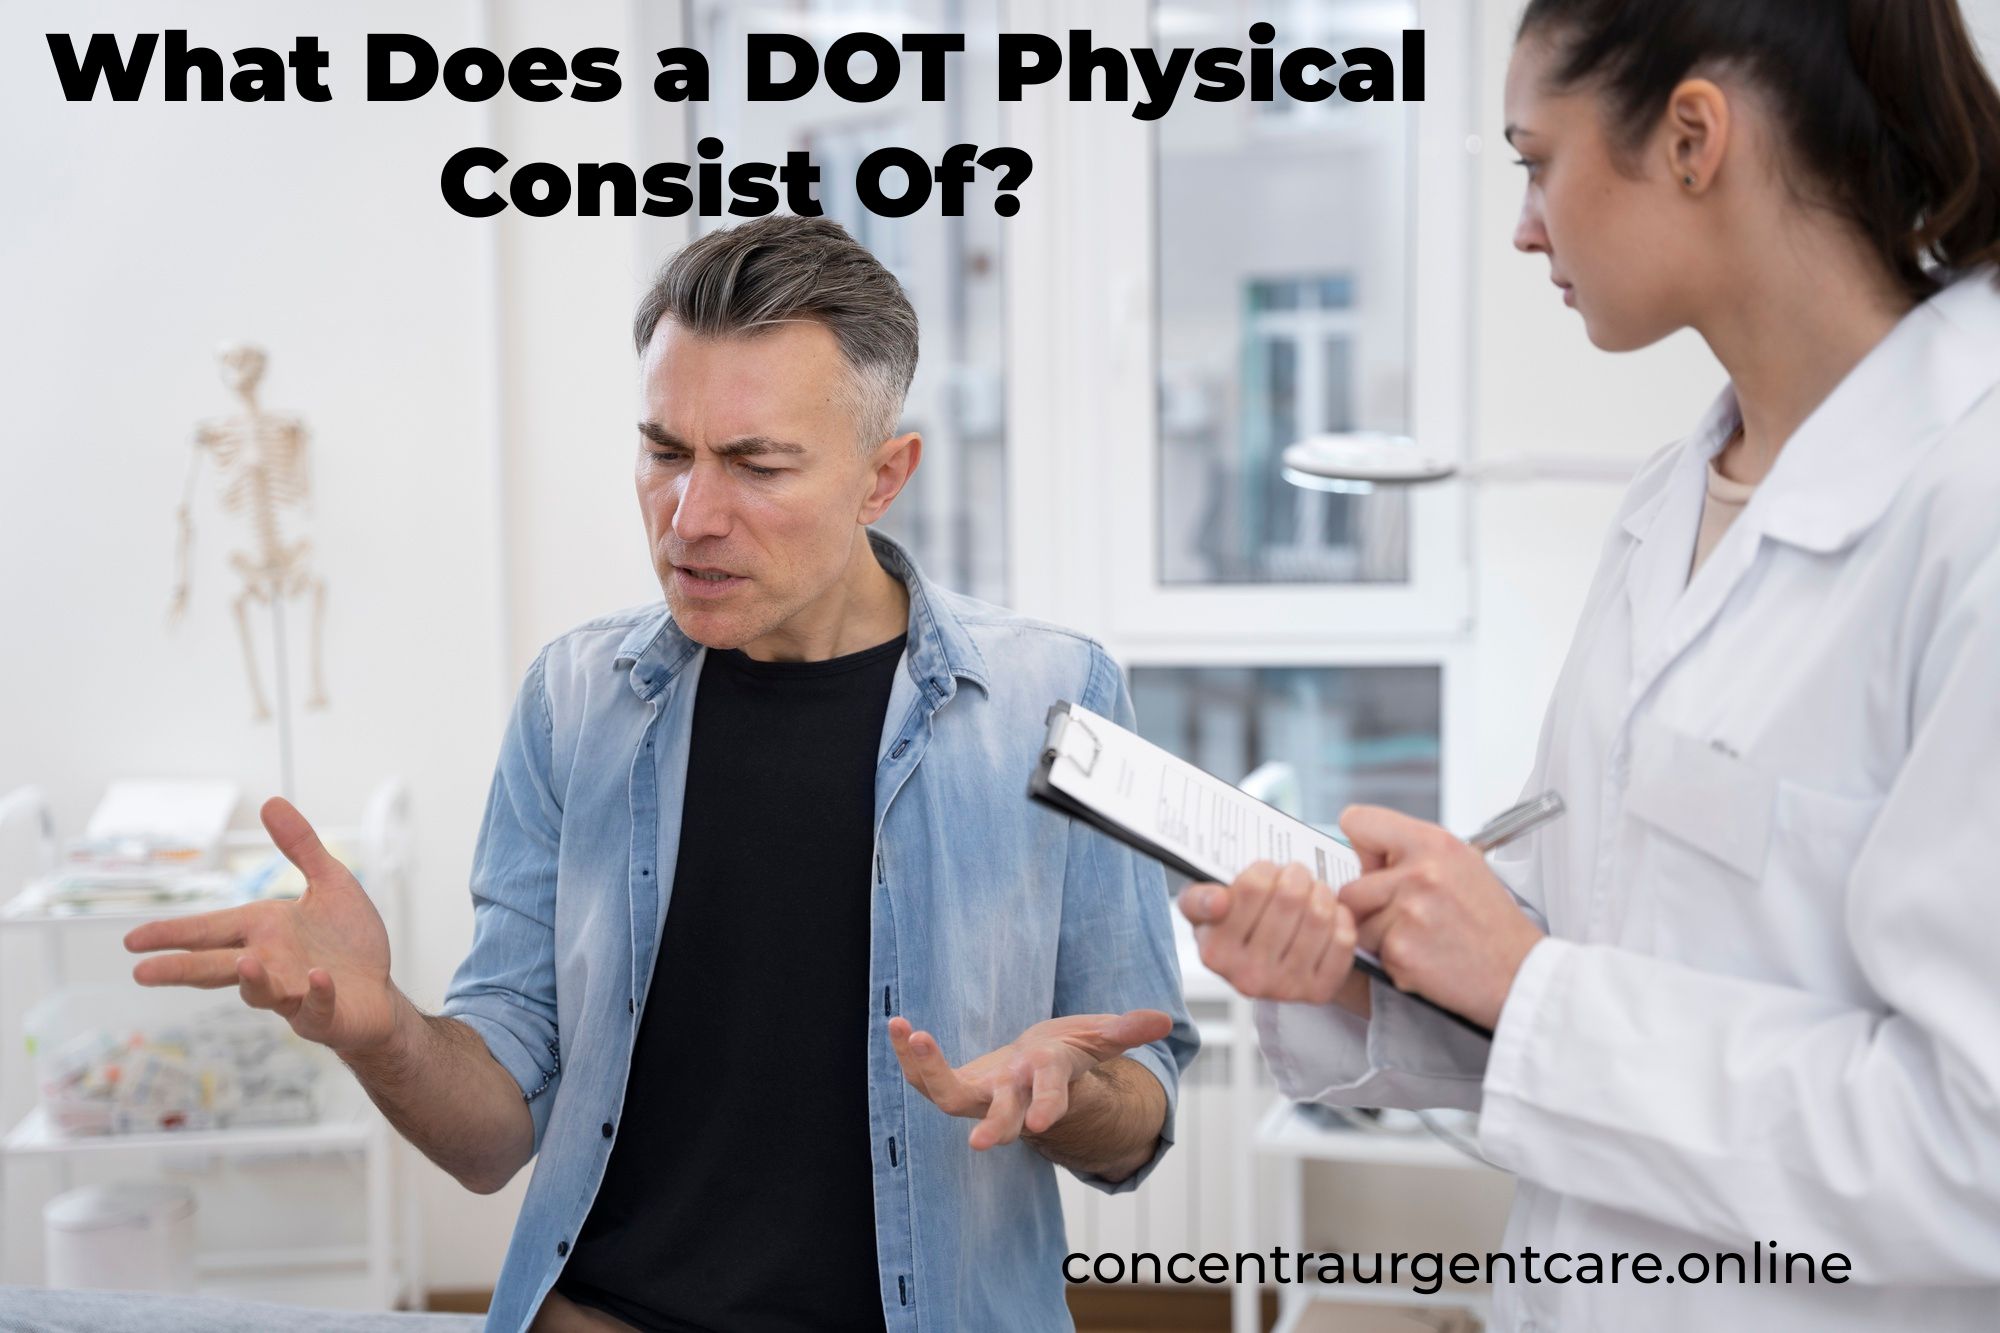 What Does a DOT Physical Consist Of